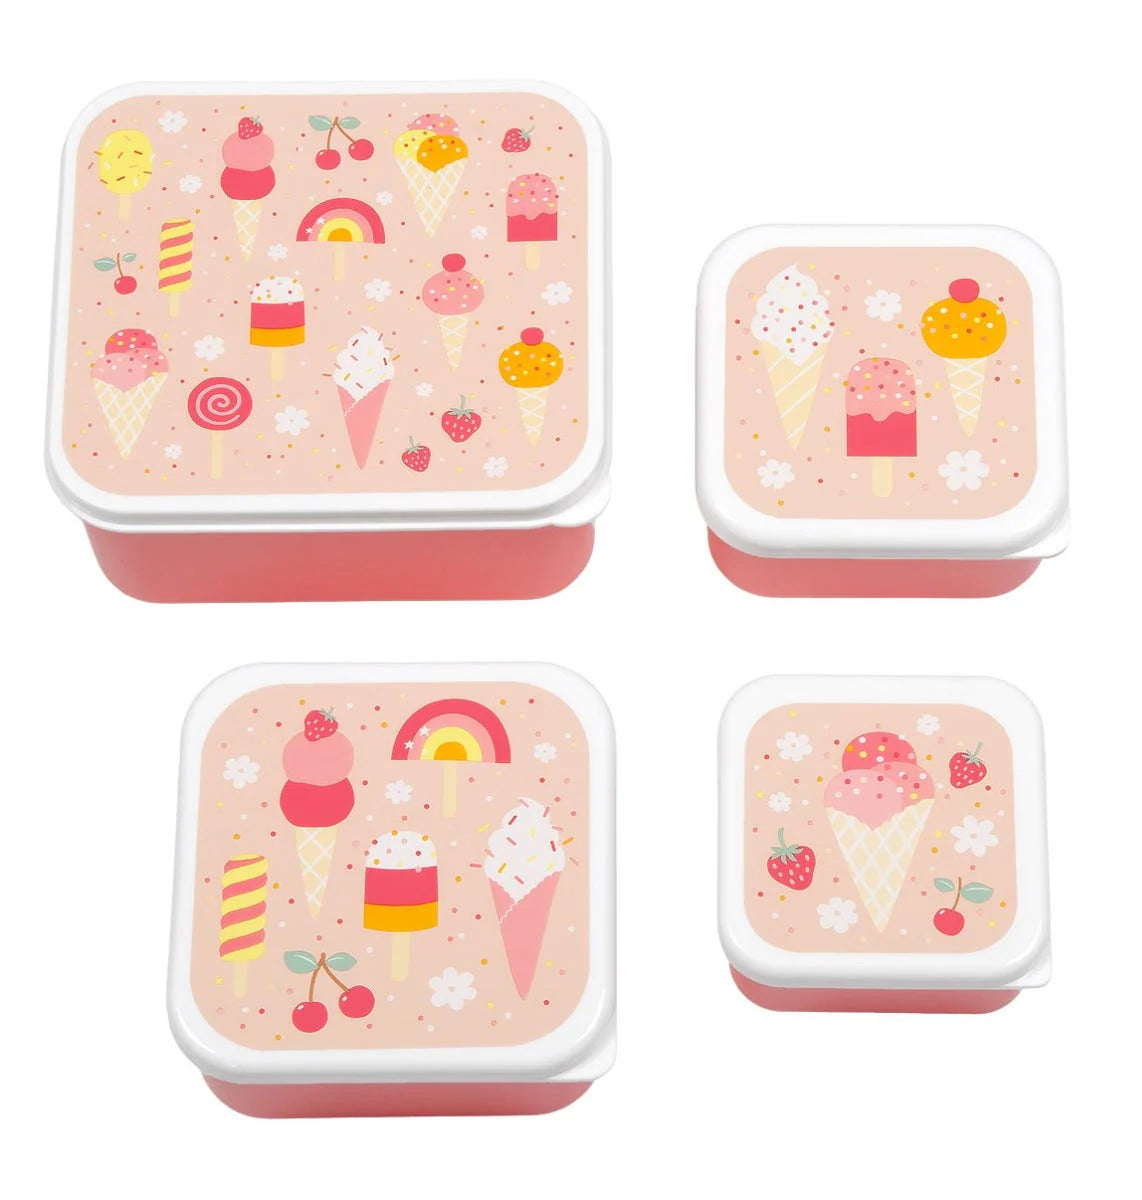 A LITTLE LOVELY COMPANY - Lunch & snack box set - Ice-cream